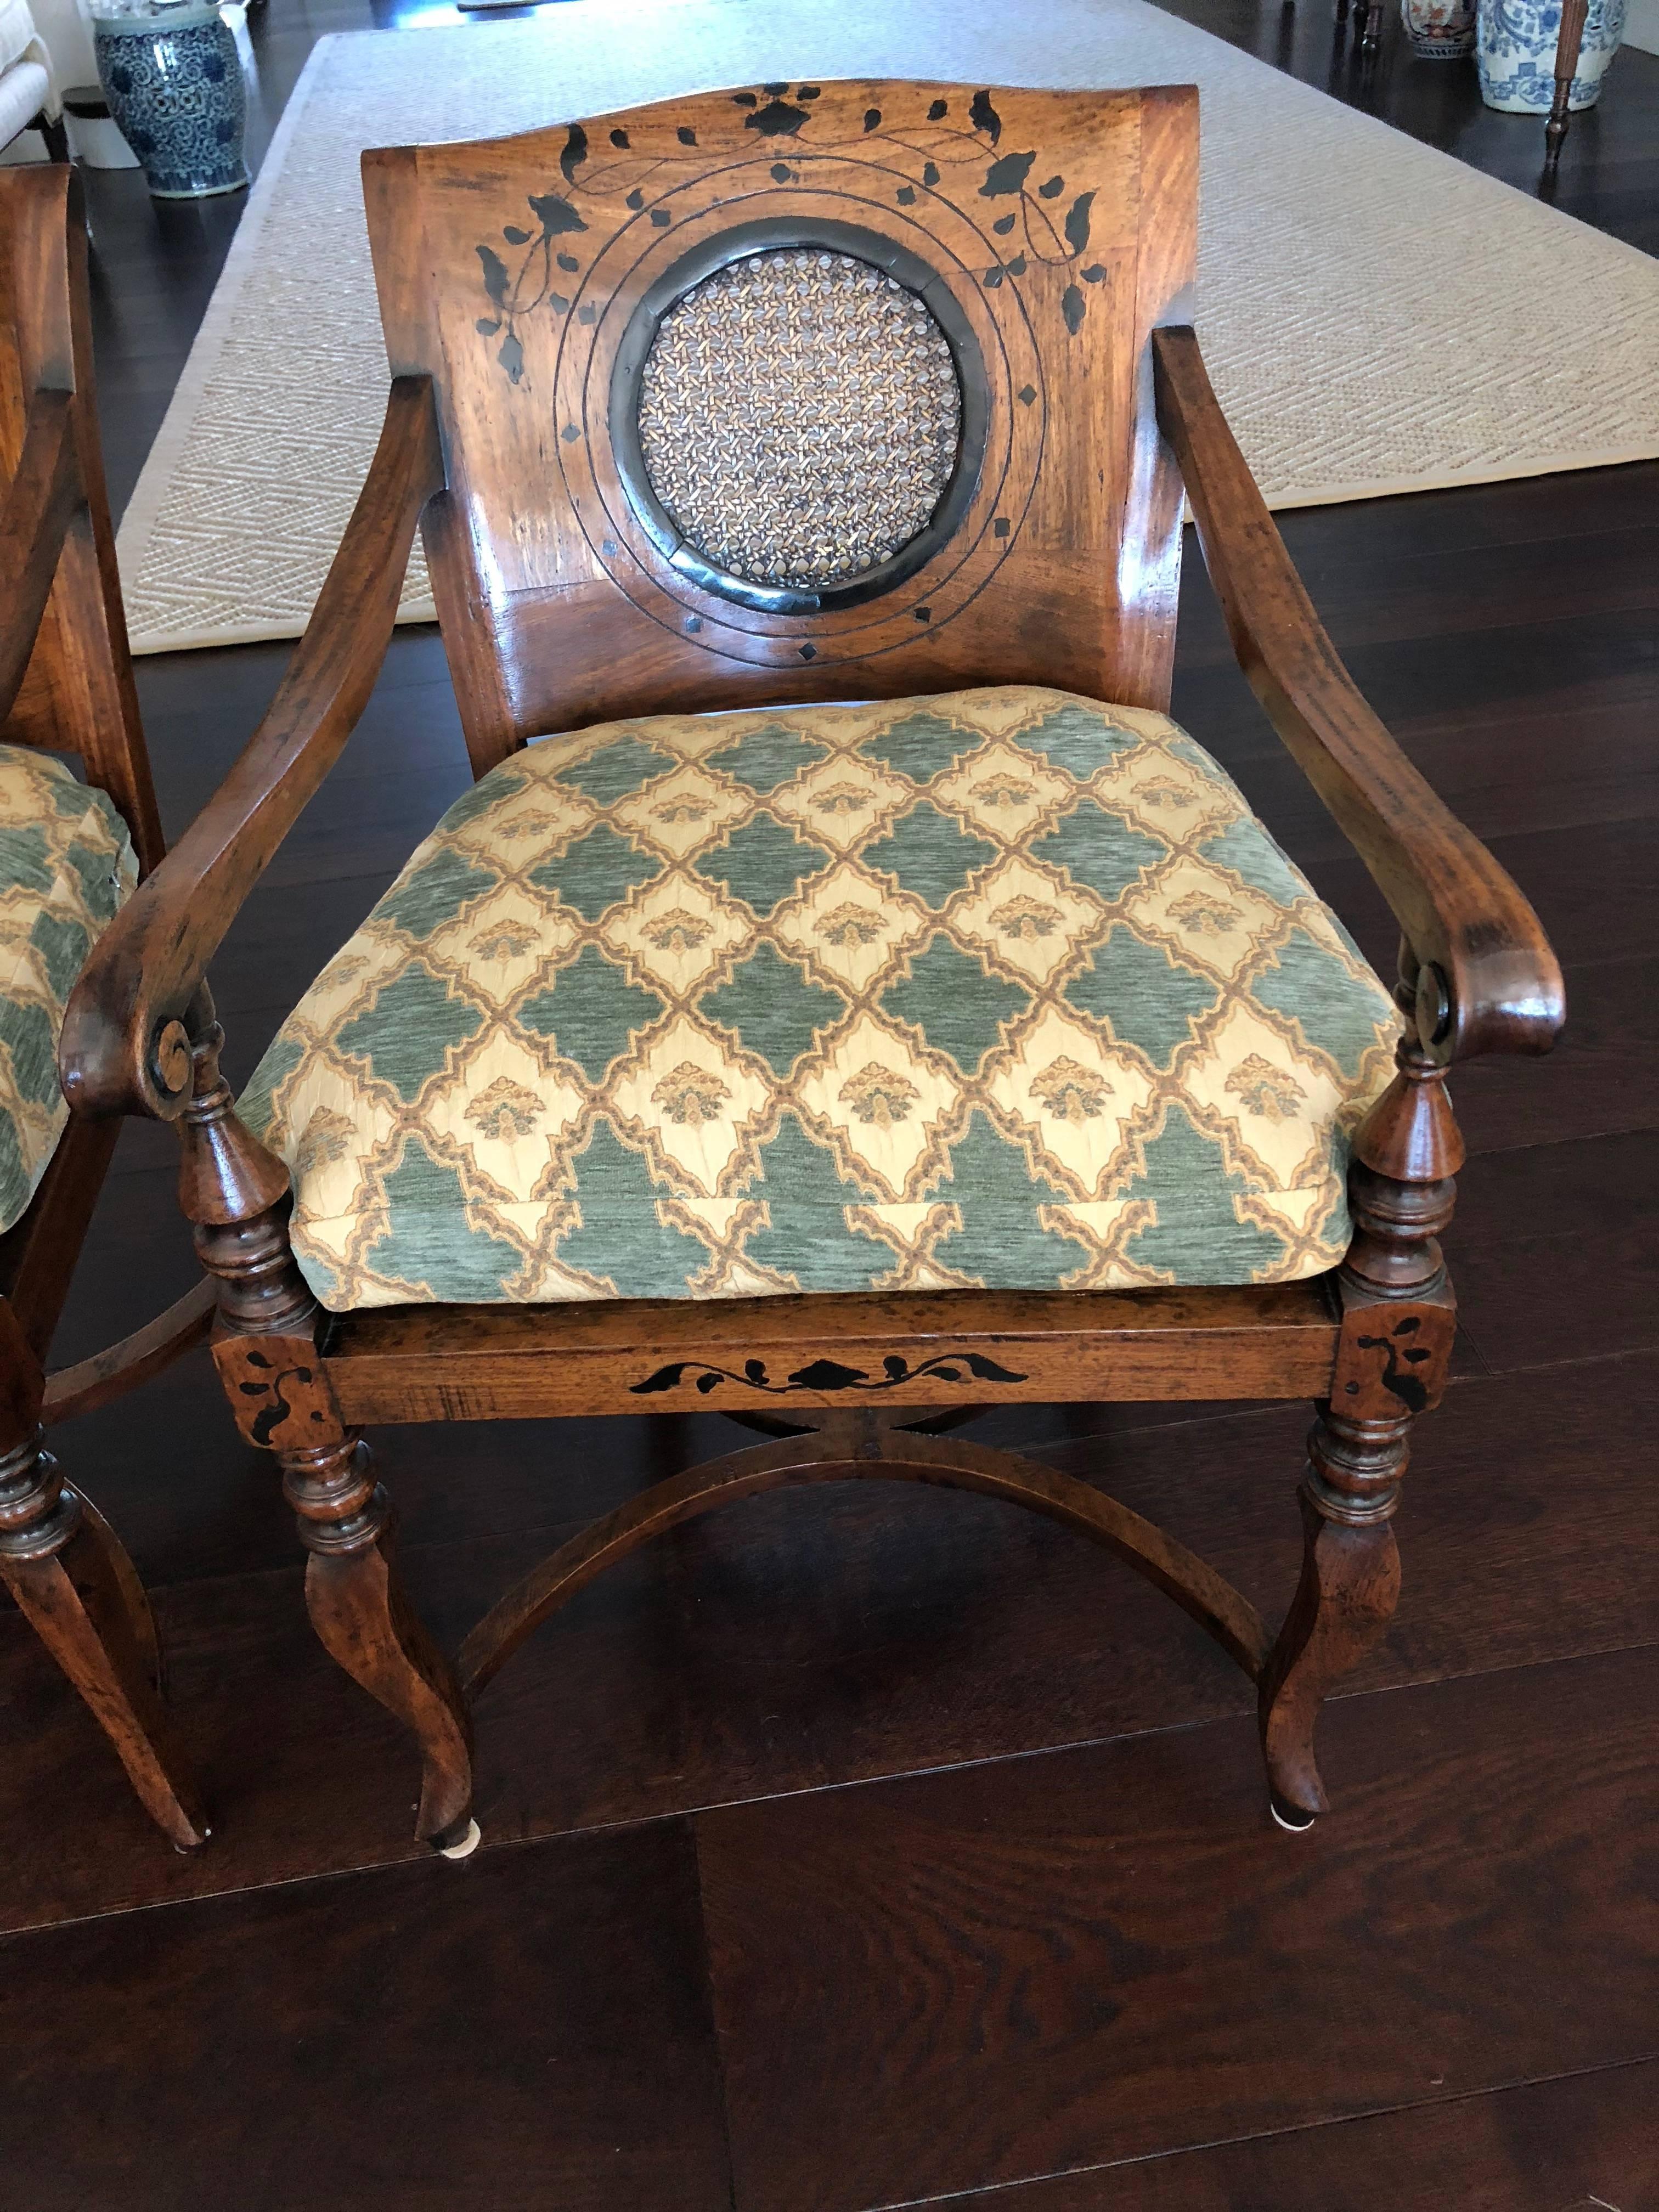 Lovely pair of Anglo-Portuguese armchairs with caned seats and circular caned insert to back having marquetry detail on the back in an ivy vine pattern. The curved legs connected by two curved stretchers. All handmade and handcrafted!